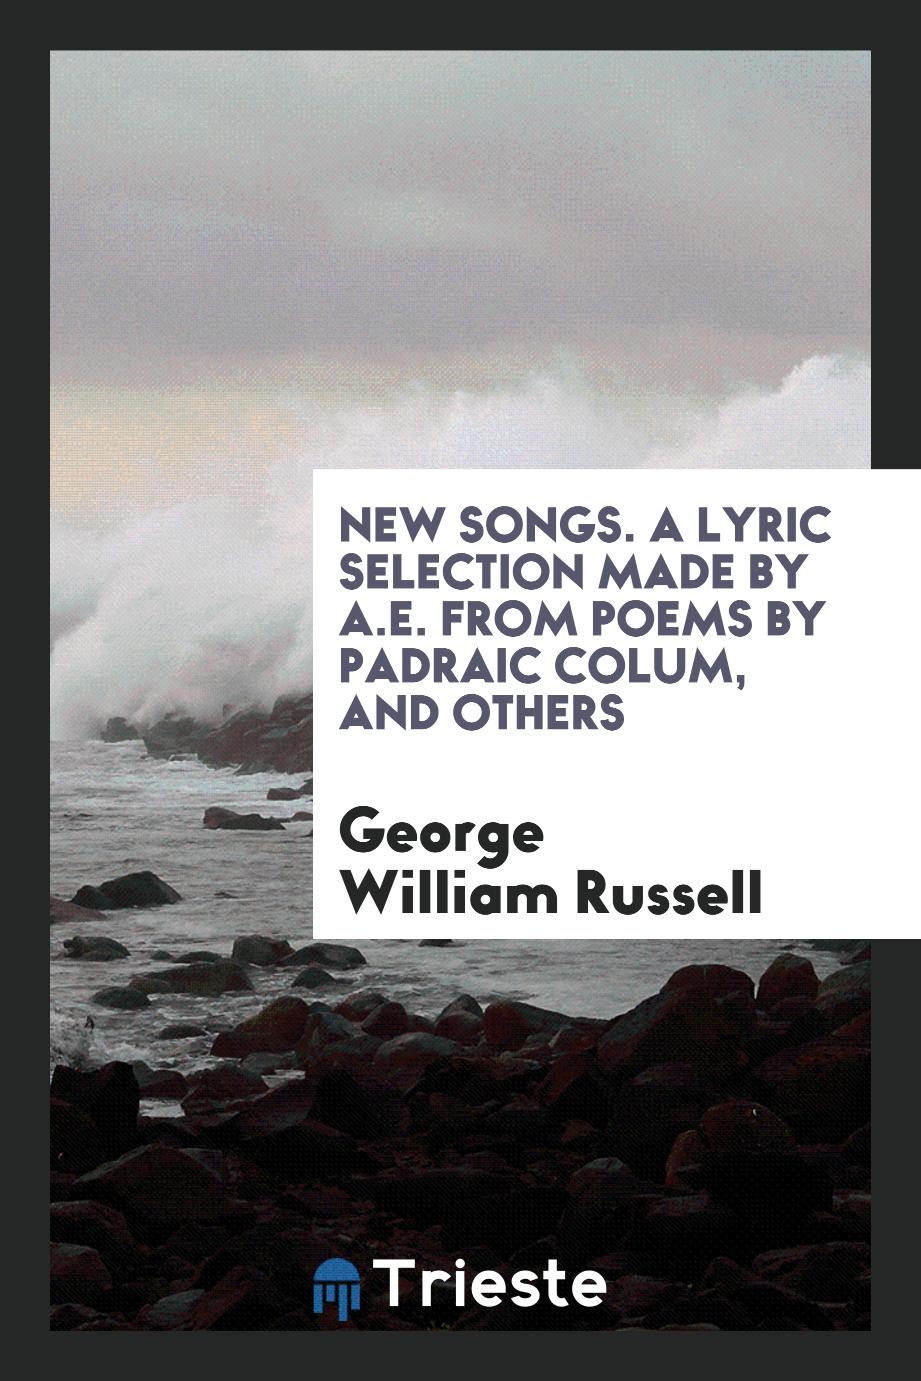 New songs. A lyric selection made by A.E. From poems by Padraic Colum, and others